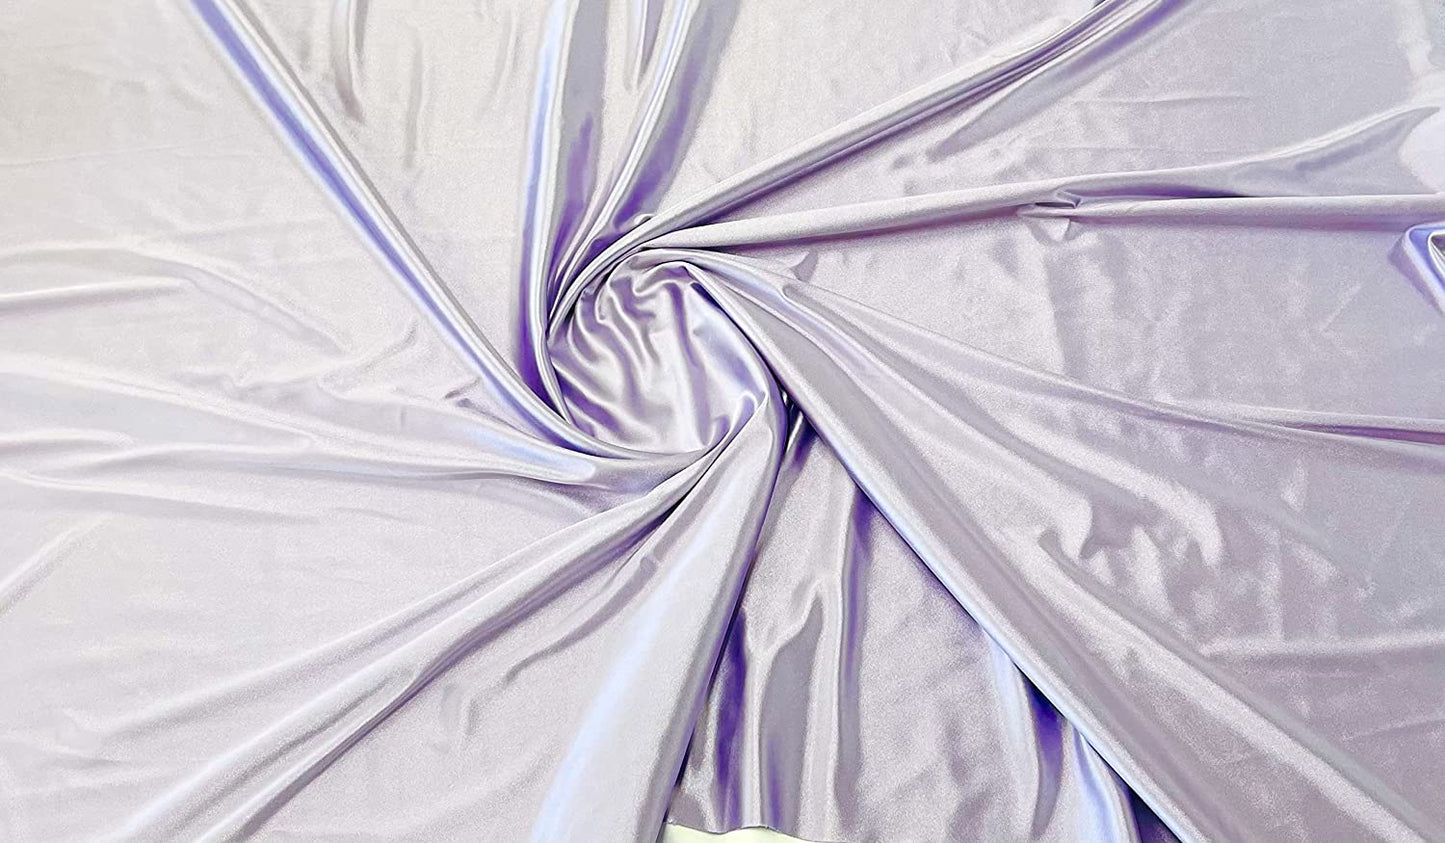 Deluxe Shiny Polyester Spandex Stretch Fabric (1 Yard, Lilac)